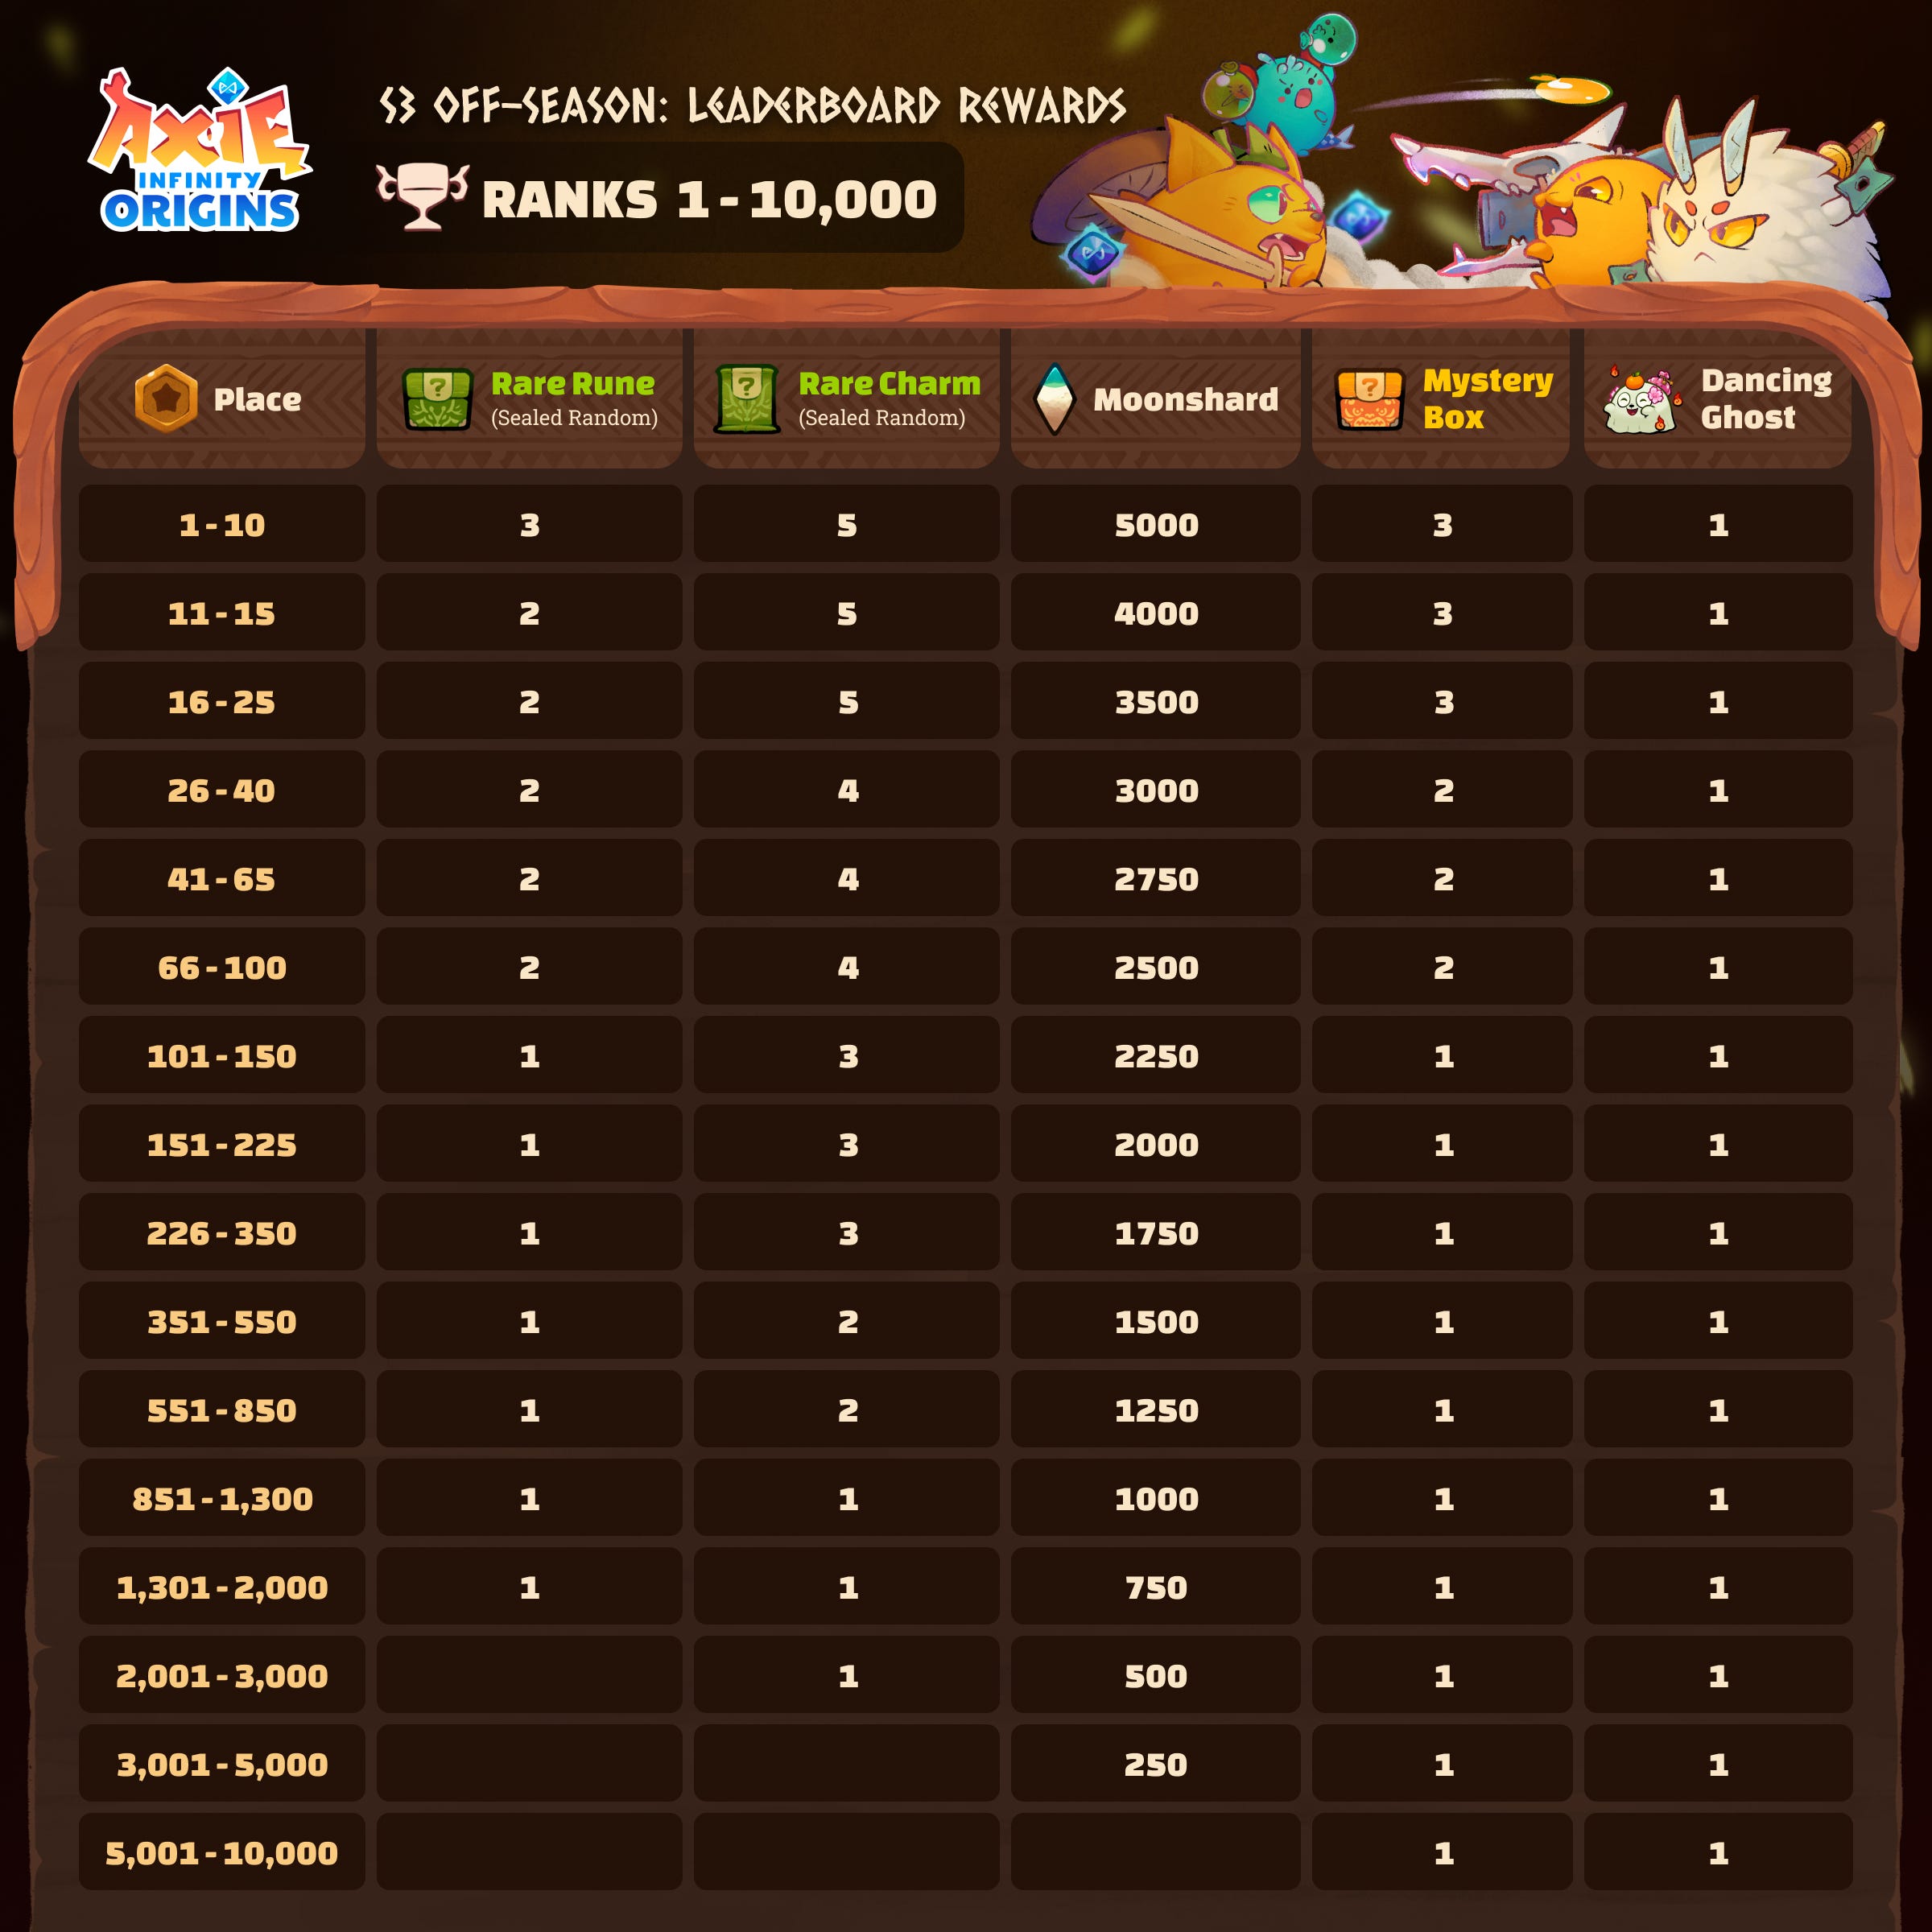 Hooga Gaming - 📊 Axie Origins Season 1 Leaderboard Update 📊  Congratulation to our competitive Hooga Ape, PuroKy#1Fan who is currently  in the top 10 of the Axie Origins Season 1 leaderboard! 💪